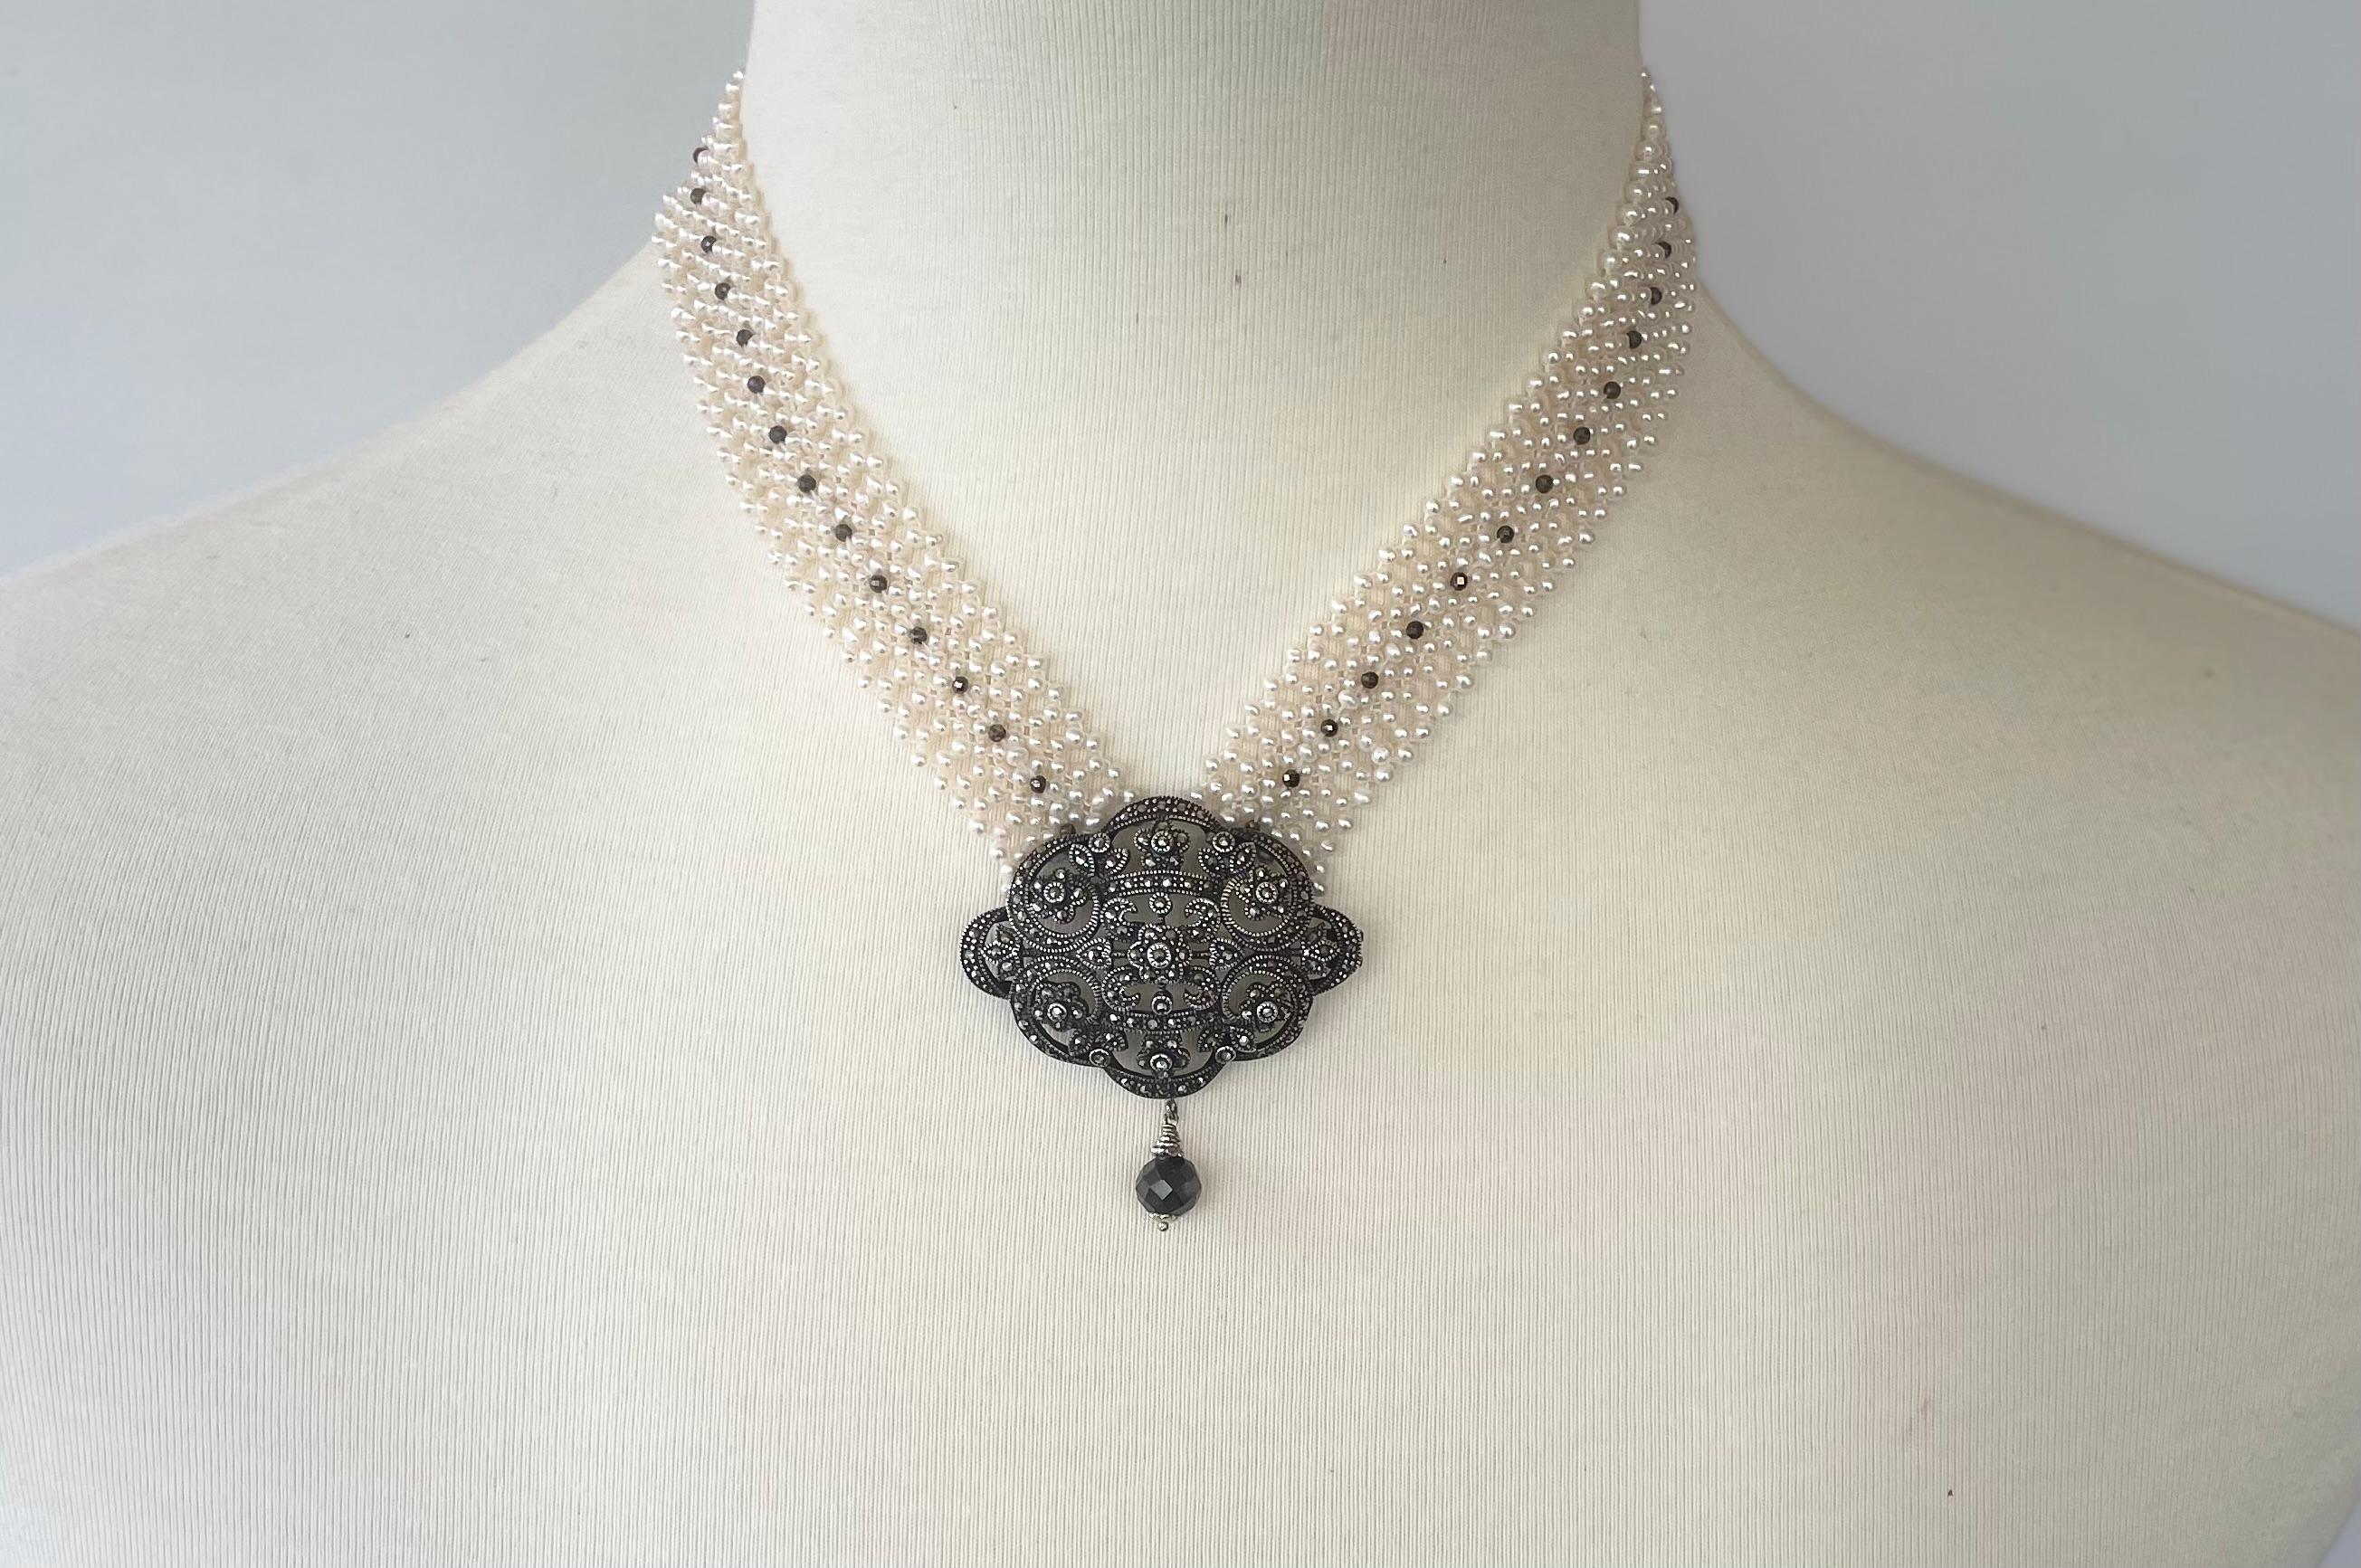 Marina J. Woven Pearl Necklace with Vintage Silver Centerpiece and Black Spinnel For Sale 6